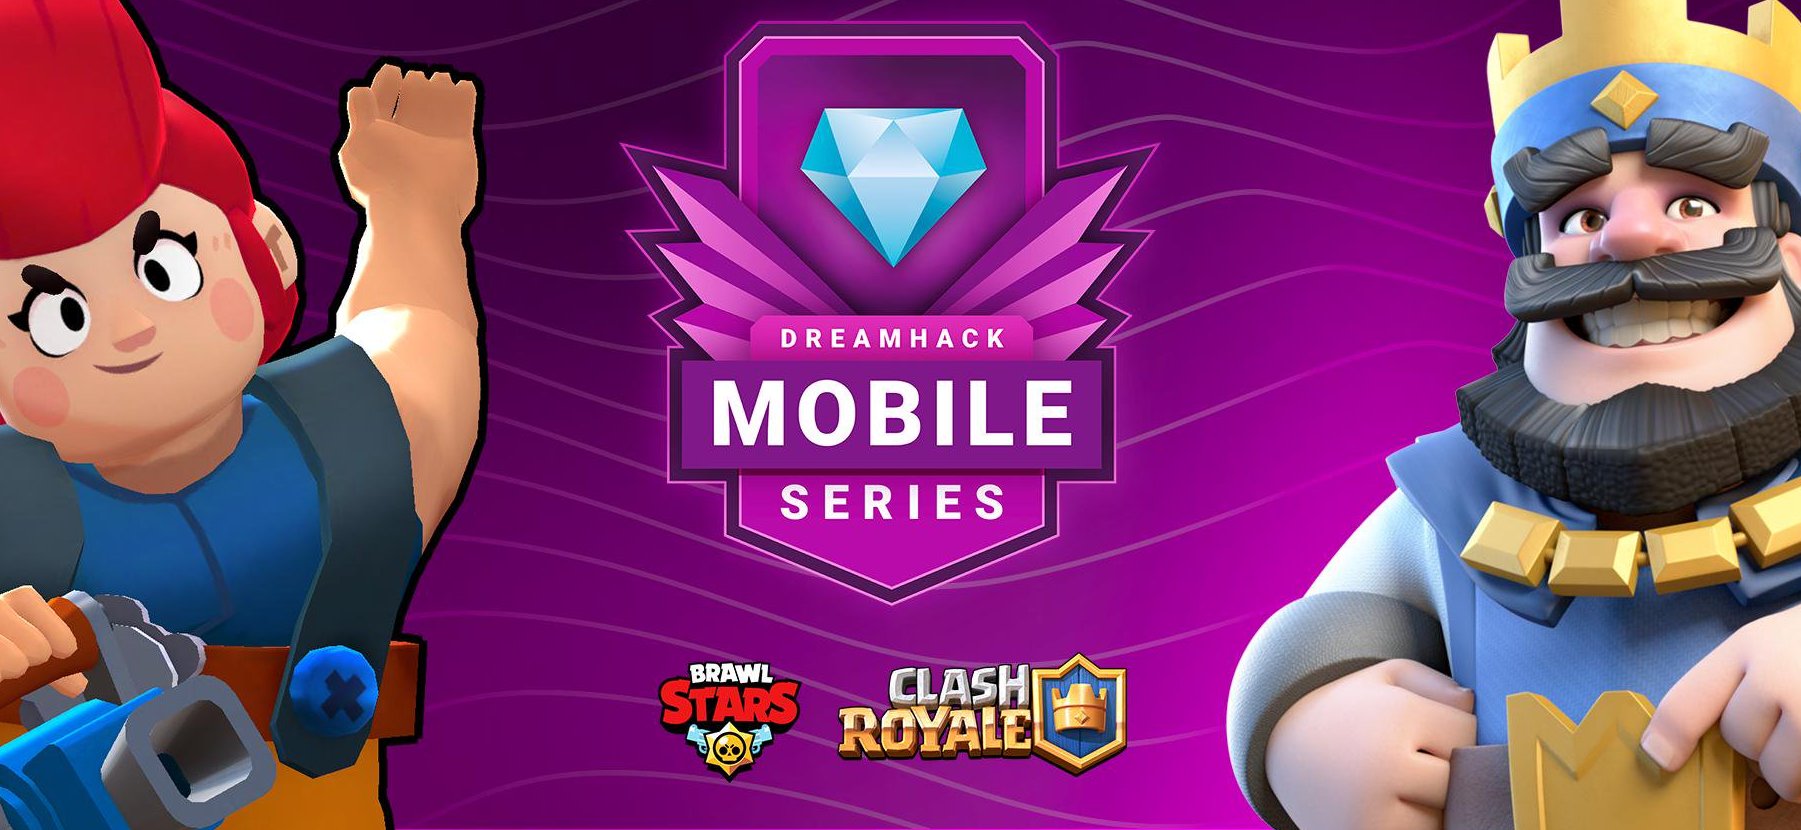 Dreamhack Mobile Series At Dallas To Be Held This Weekend And Will Feature Brawl Stars And Clash Royale Dot Esports - brawl stars introduced to clash royale